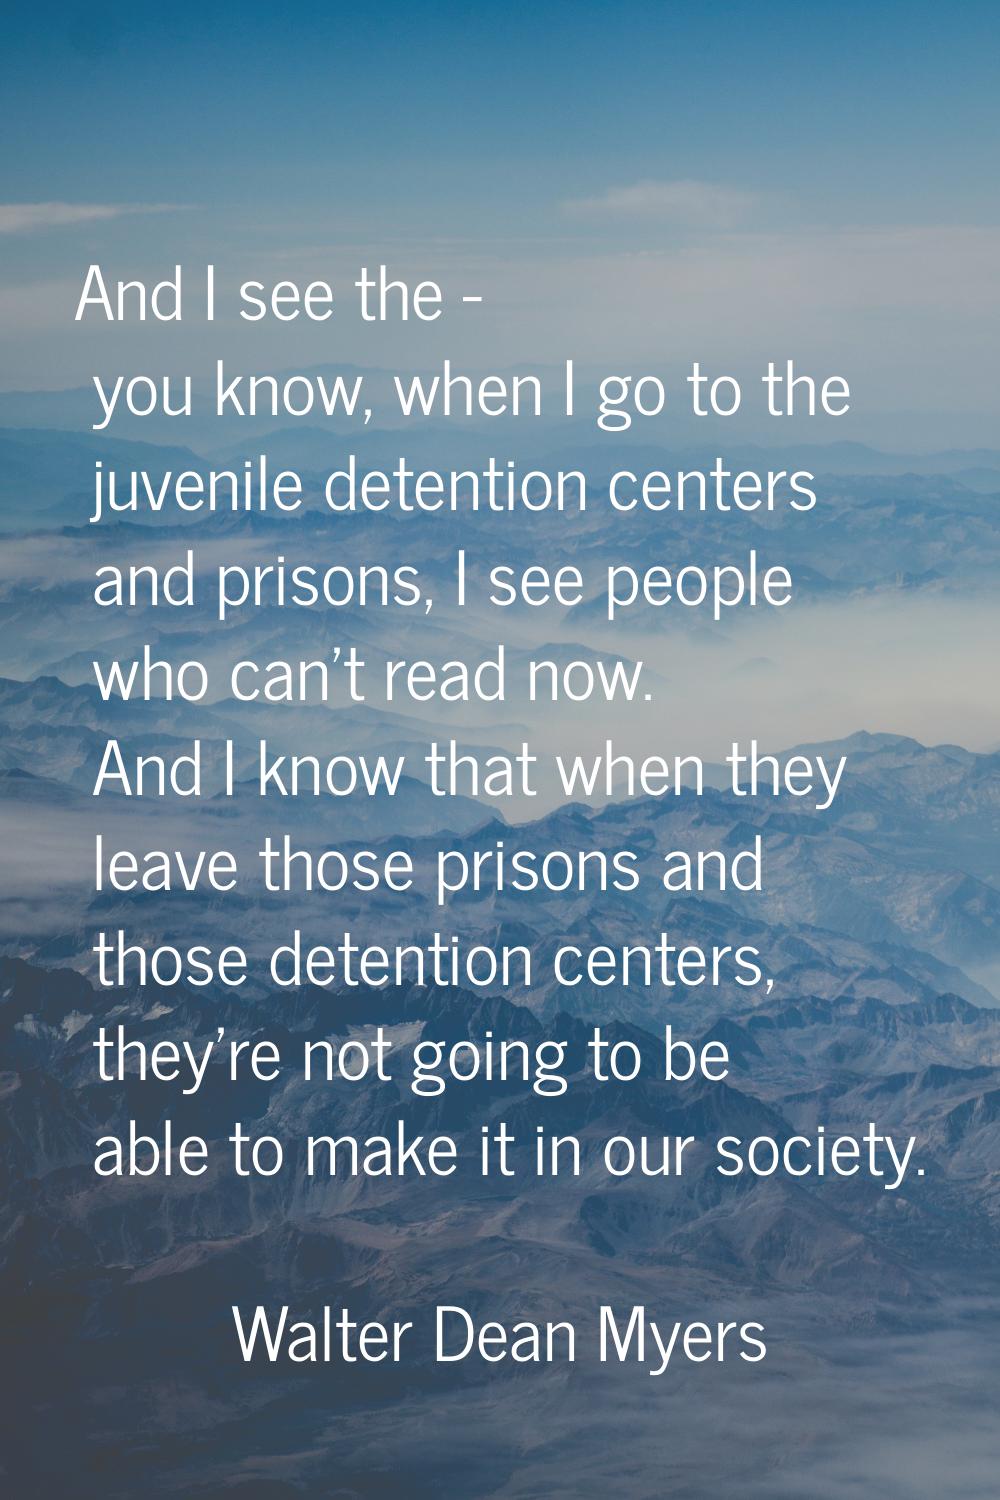 And I see the - you know, when I go to the juvenile detention centers and prisons, I see people who